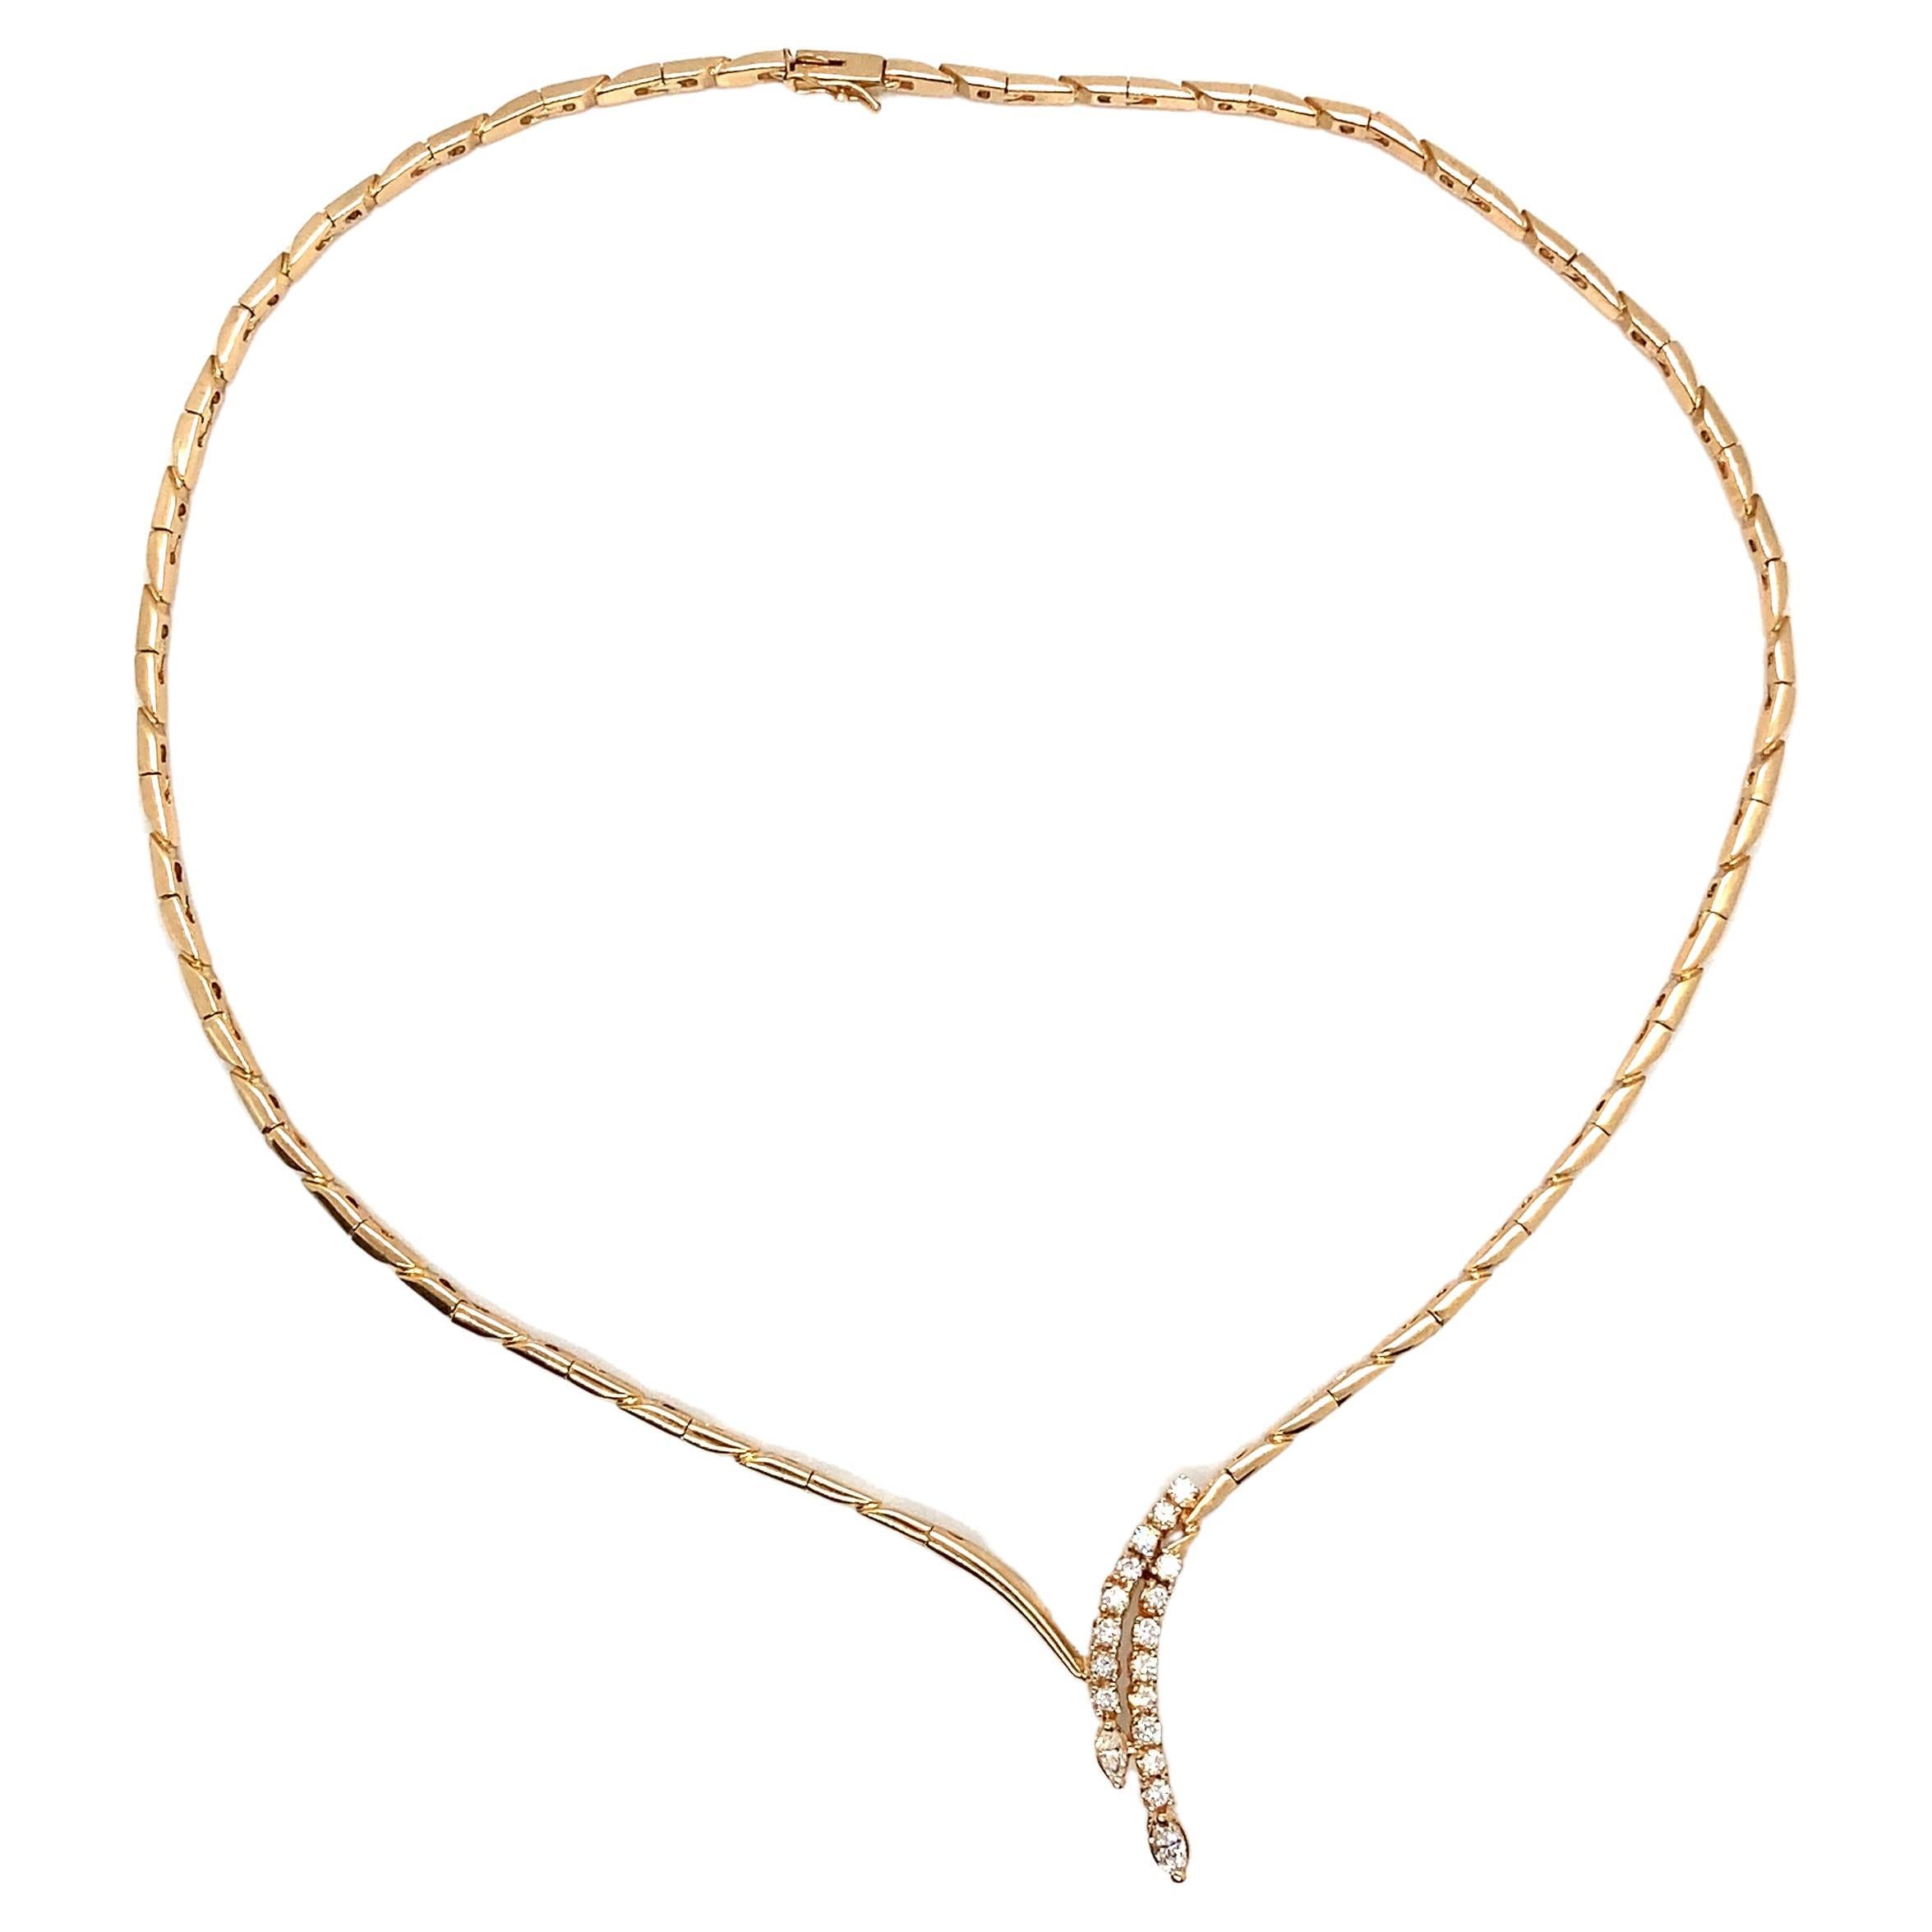 Vintage 1990's 14K Yellow Gold Diamond Waterfall Choker Necklace - The necklace contains 2 rows of flowing round diamonds and marquise diamonds at the end that measures about 1.25